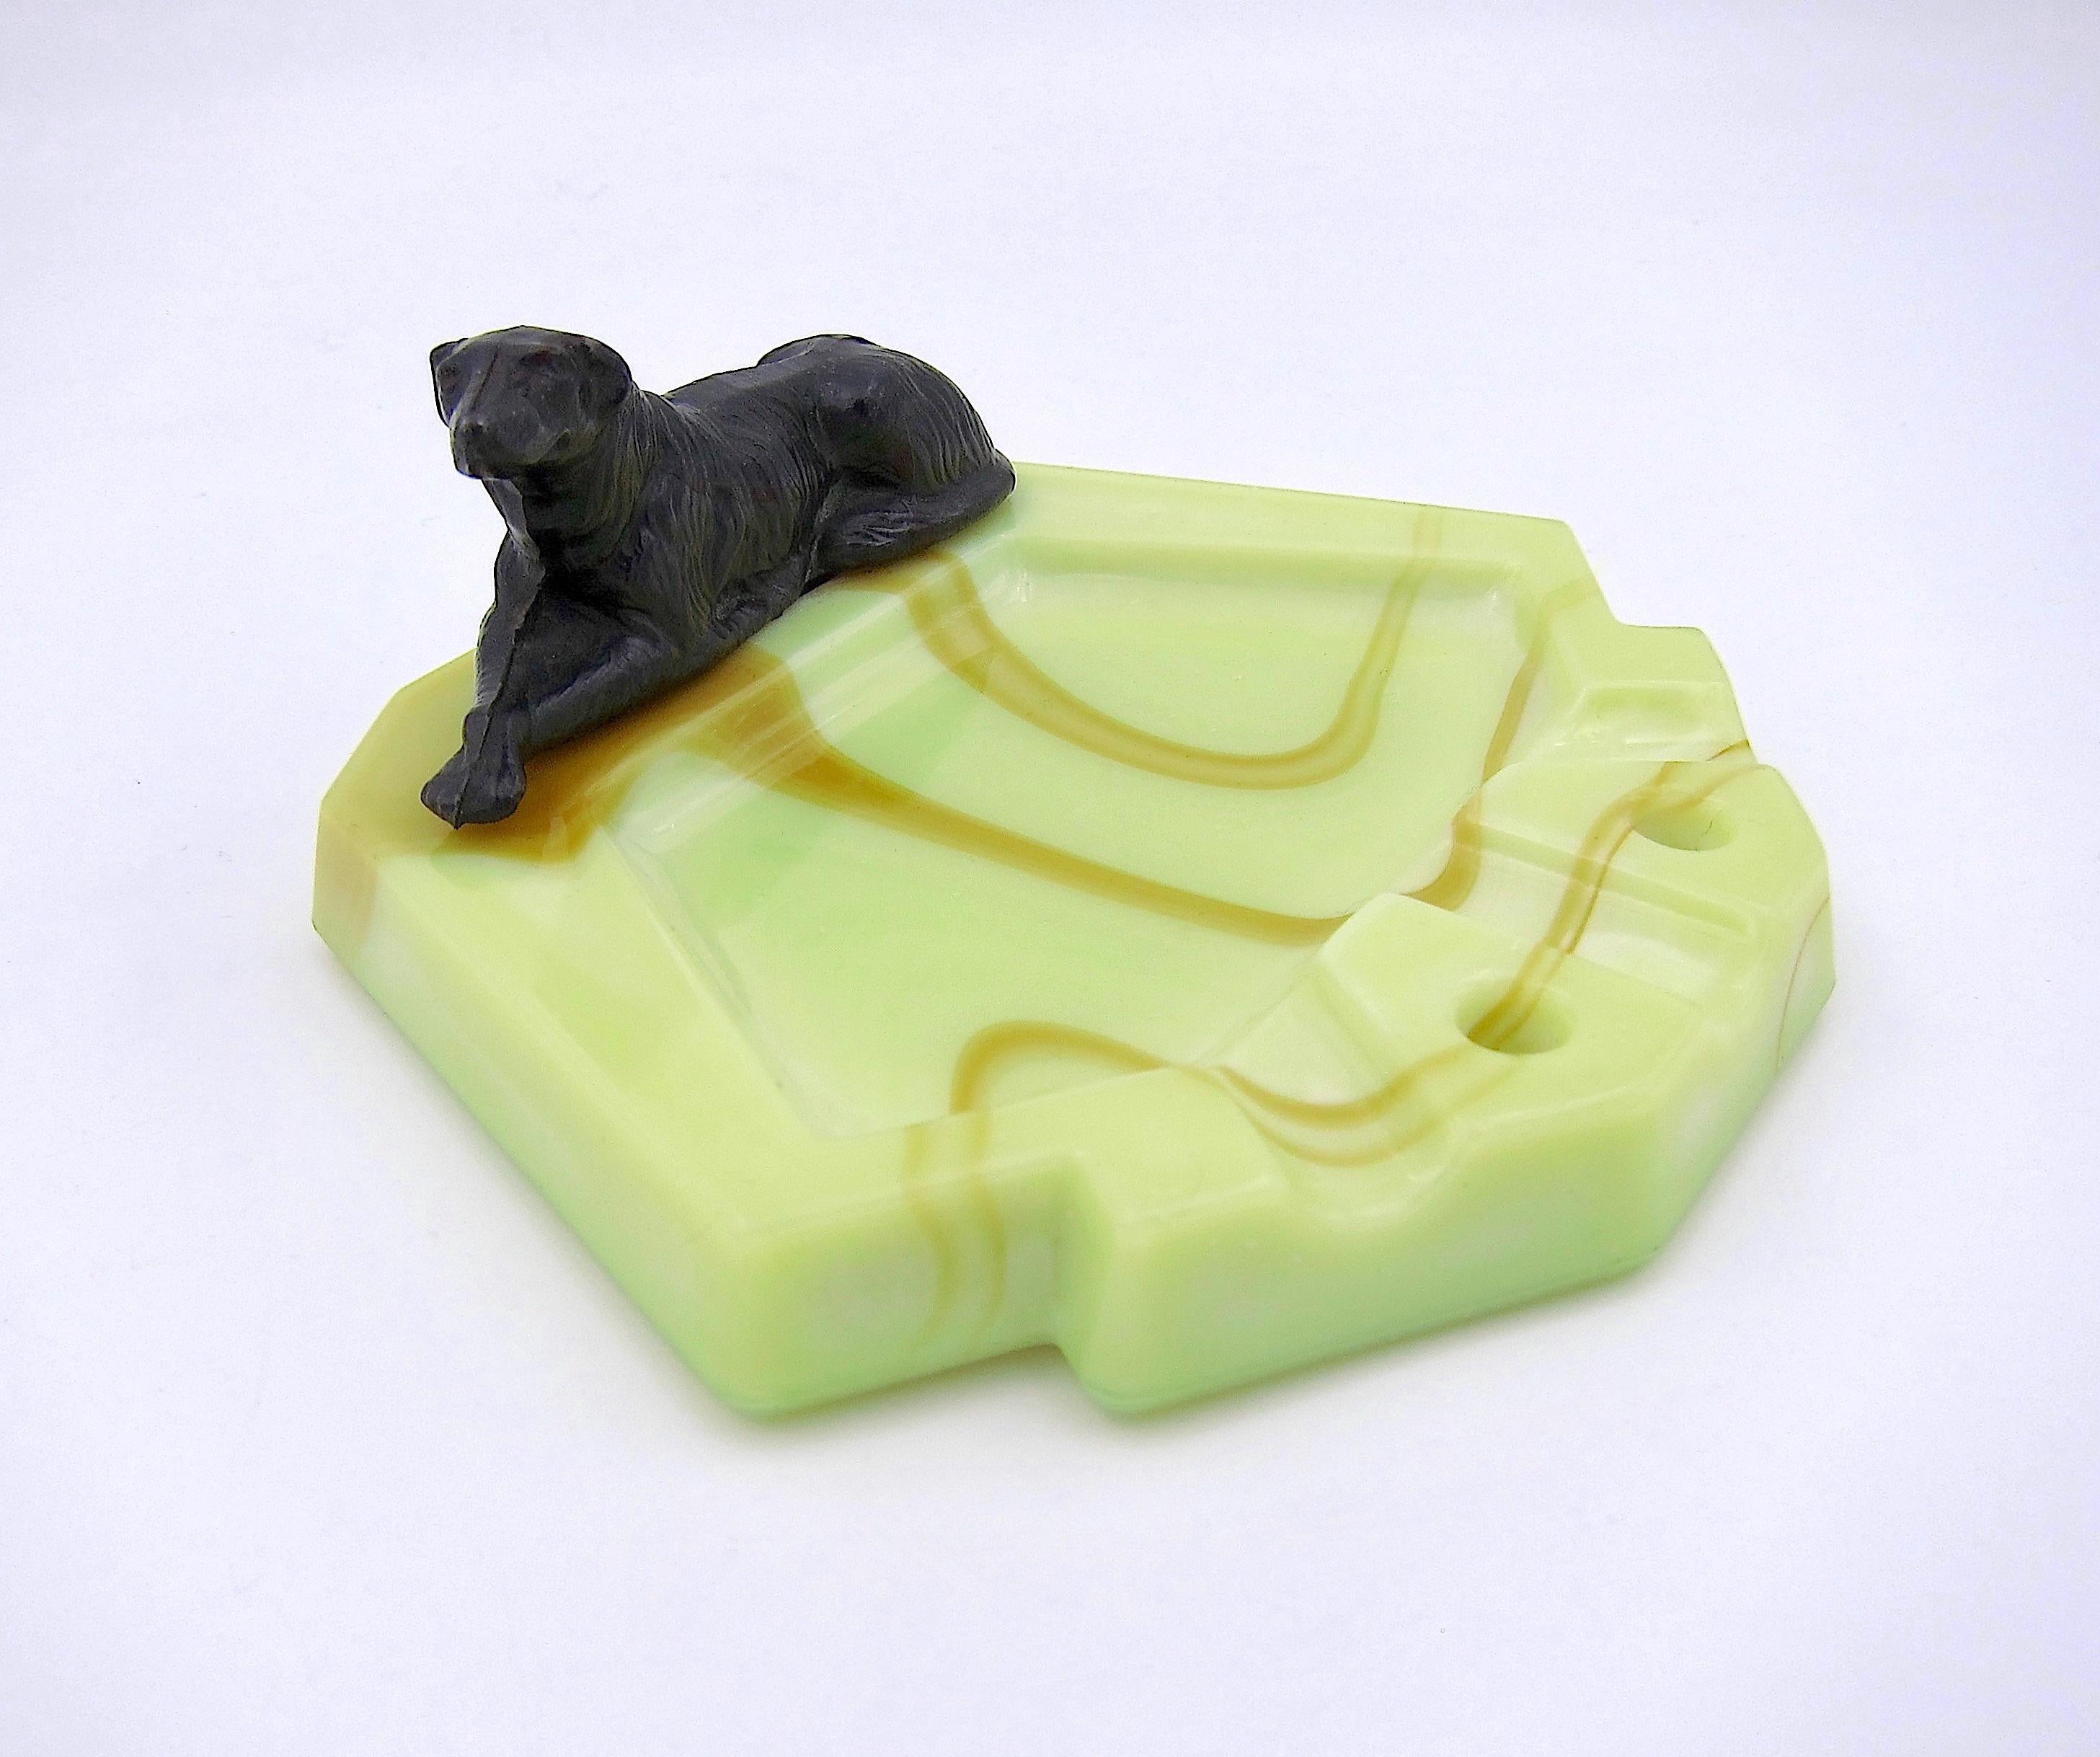 An Art Deco catchall dish or ashtray in marbleized pale green glass with butterscotch swirl accents and a spelter metal sculpture of a Borzoi / Russian Wolfhound mounted at the edge. Unmarked but manufactured by L.J. Houze Convex Glass of Point